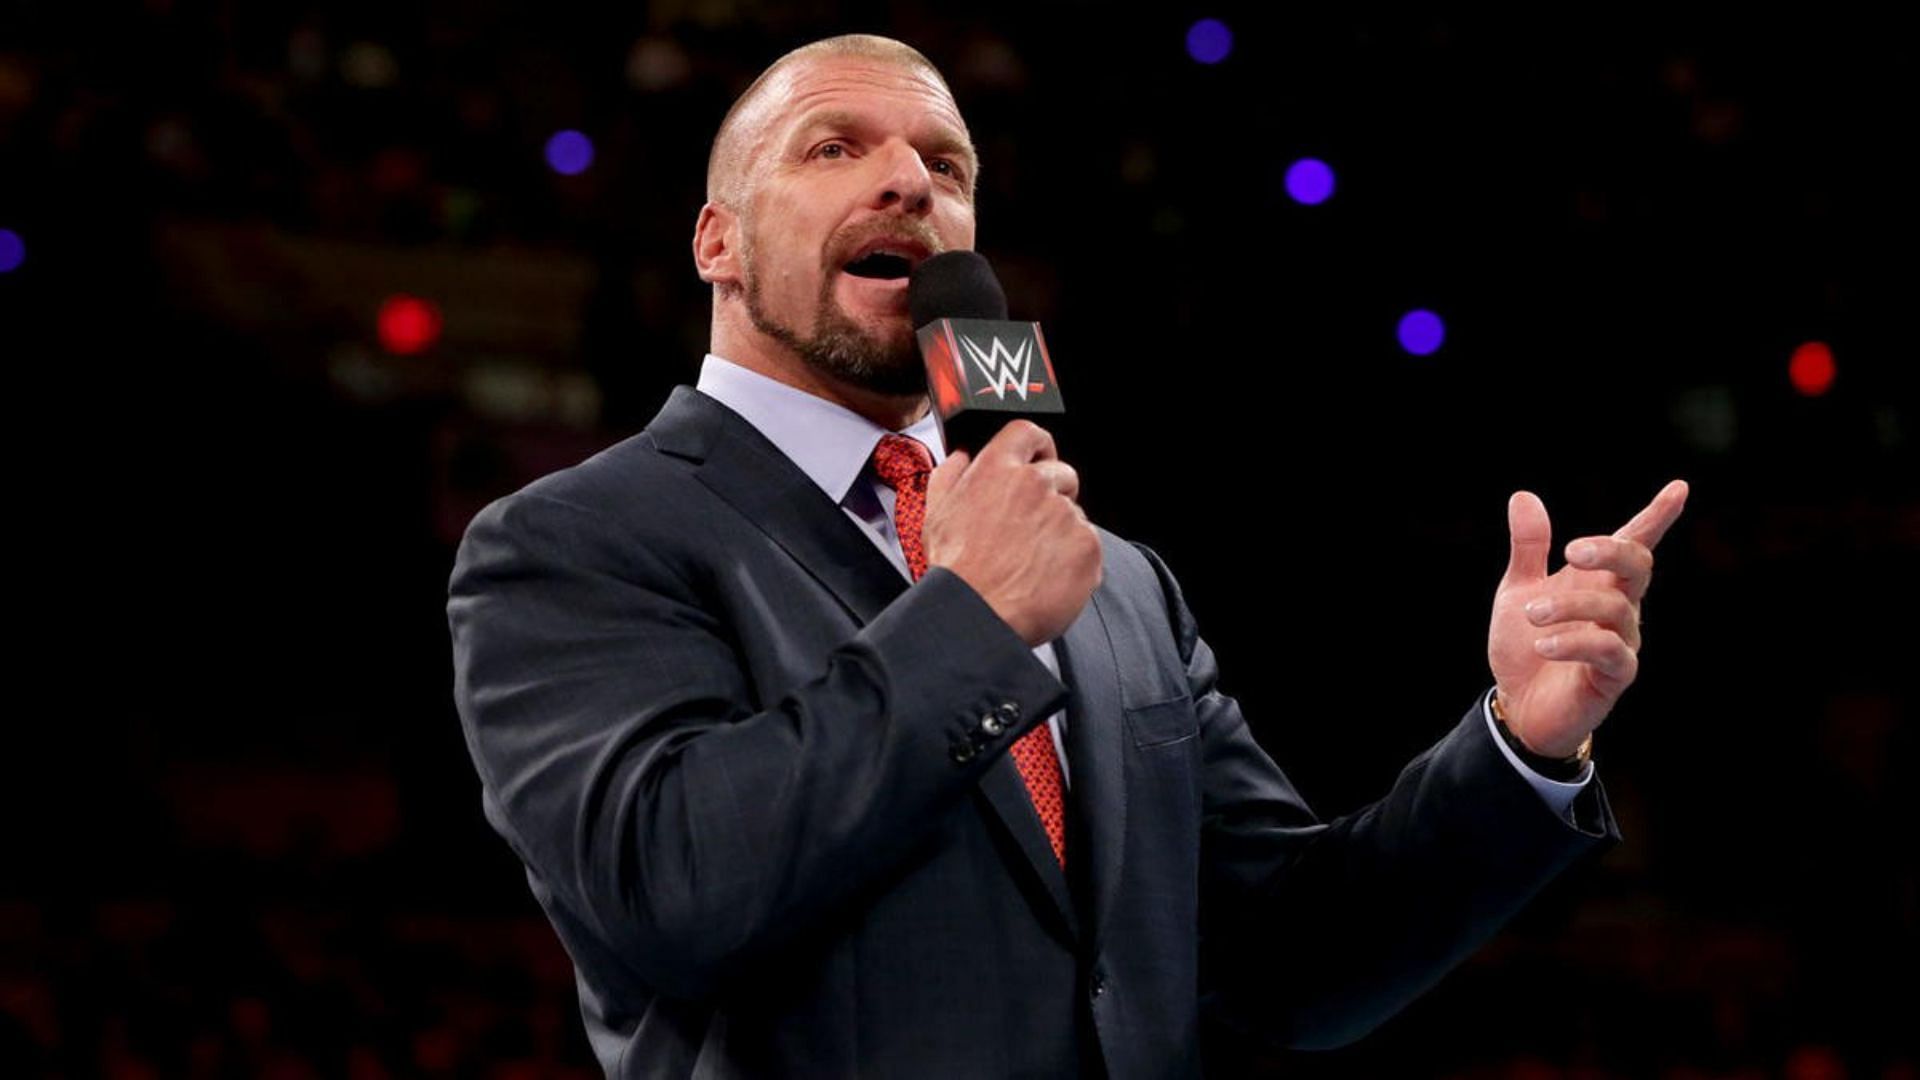 Triple H took to social media after the show